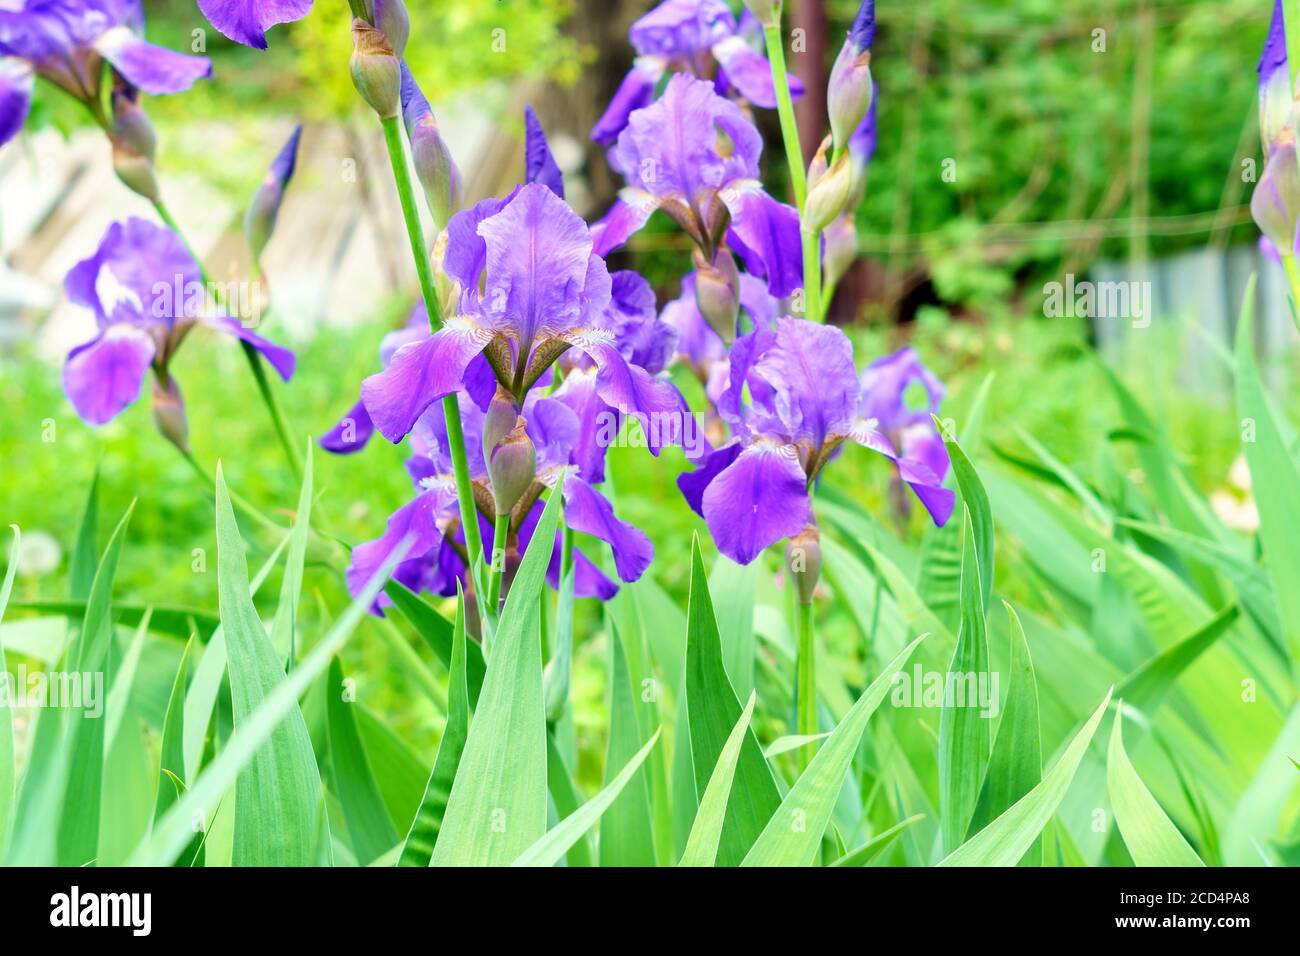 Siberian flowers of Itis Iris sanguinea on a natural green background in spring, selective focus Stock Photo